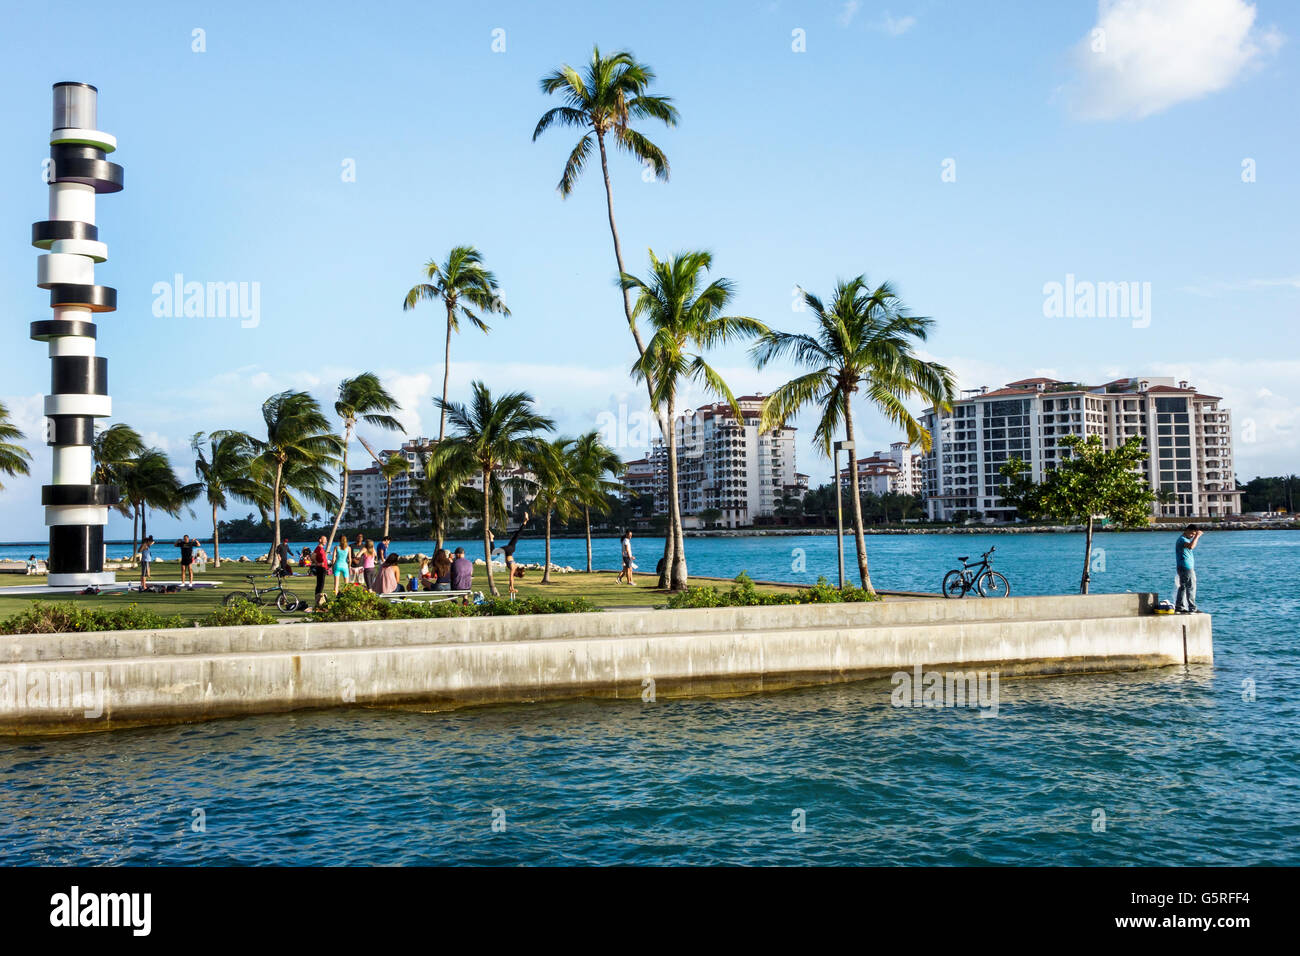 Miami Beach Florida,South Pointe Park,Government Cut,Biscayne Bay,water,Atlantic Ocean,Obstinate Lighthouse,Tobias Rehberger,art artist,Fisher Island, Stock Photo